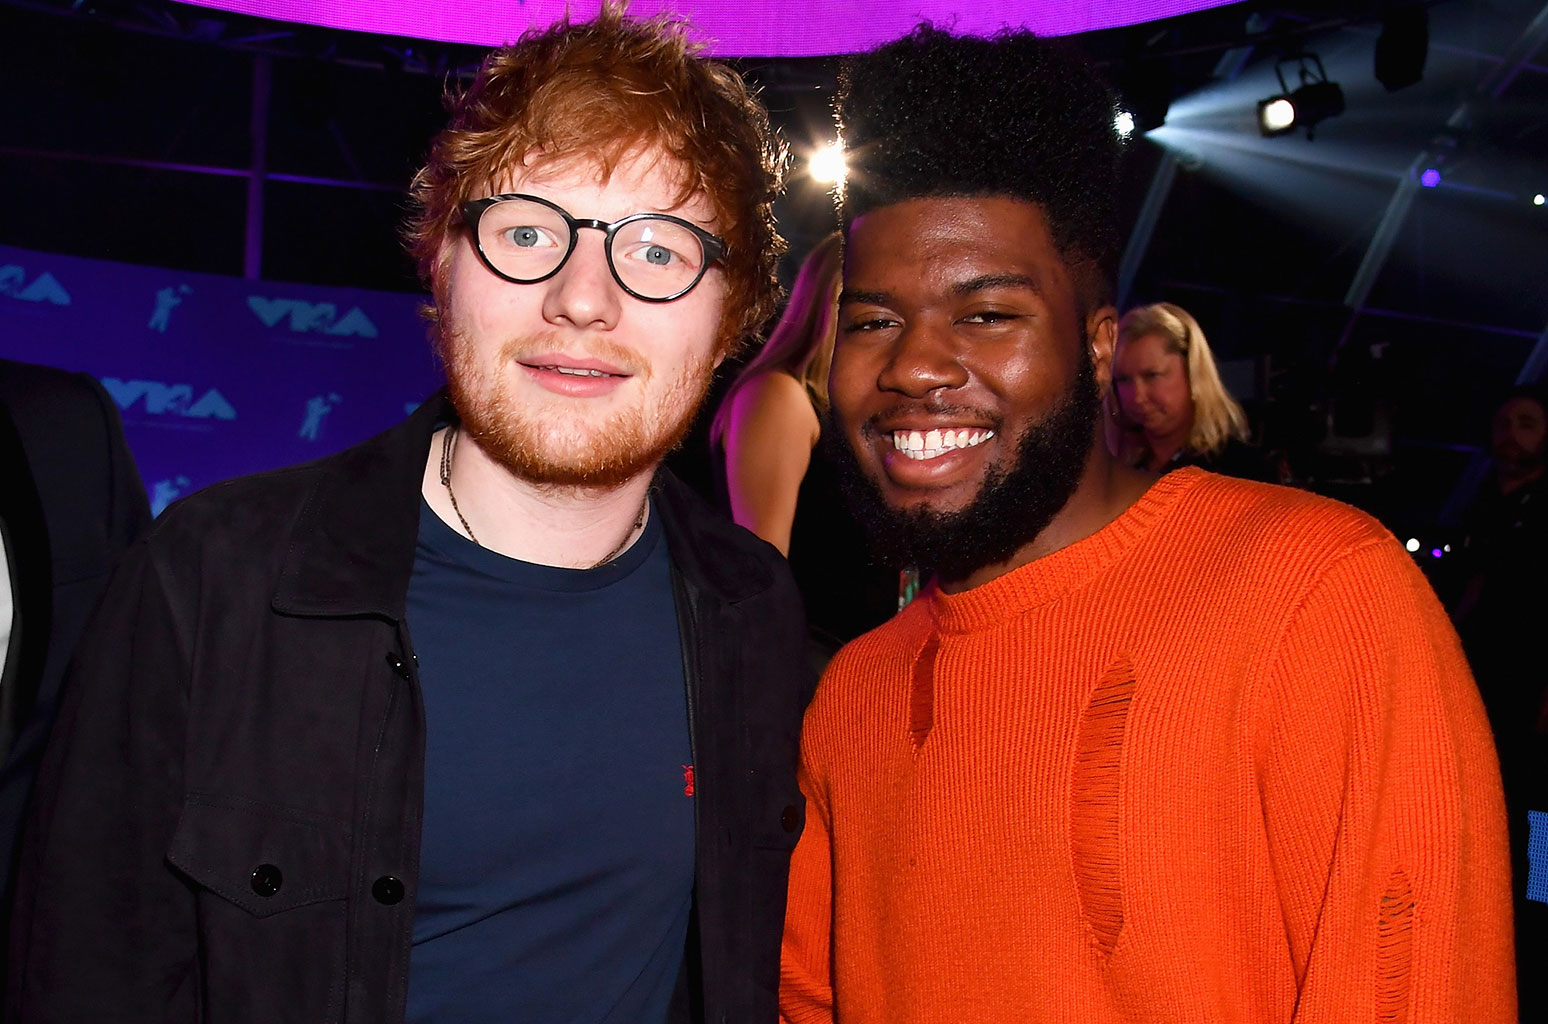 Ed Sheeran & Khalid Join Forces On New Song "Beautiful People"